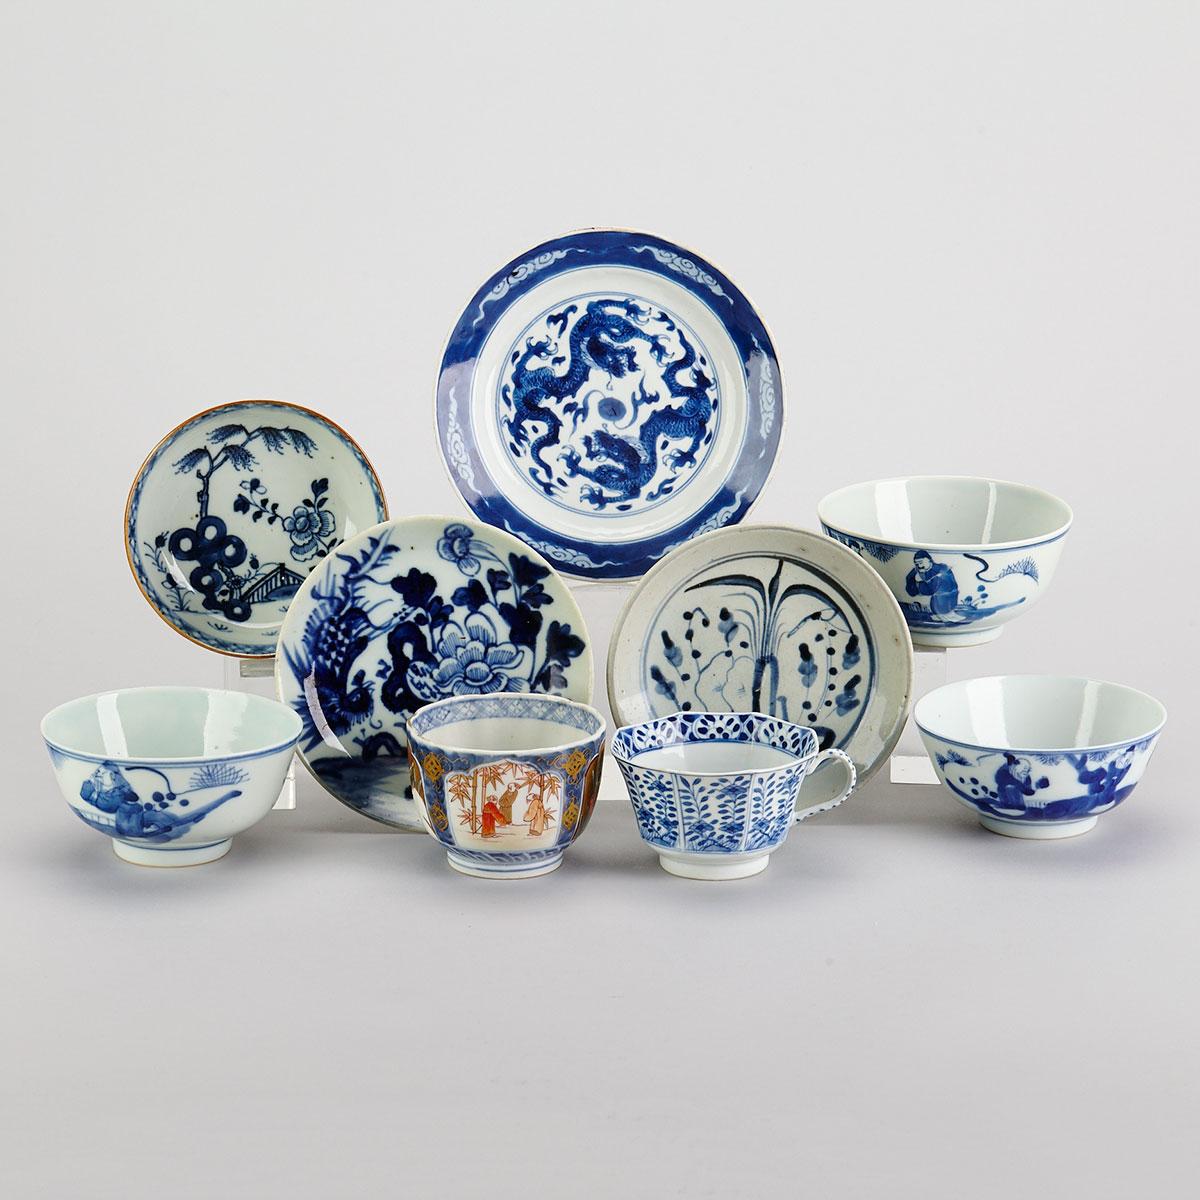 Group of Nine Blue and White Porcelain Wares, 17th to 19th Century